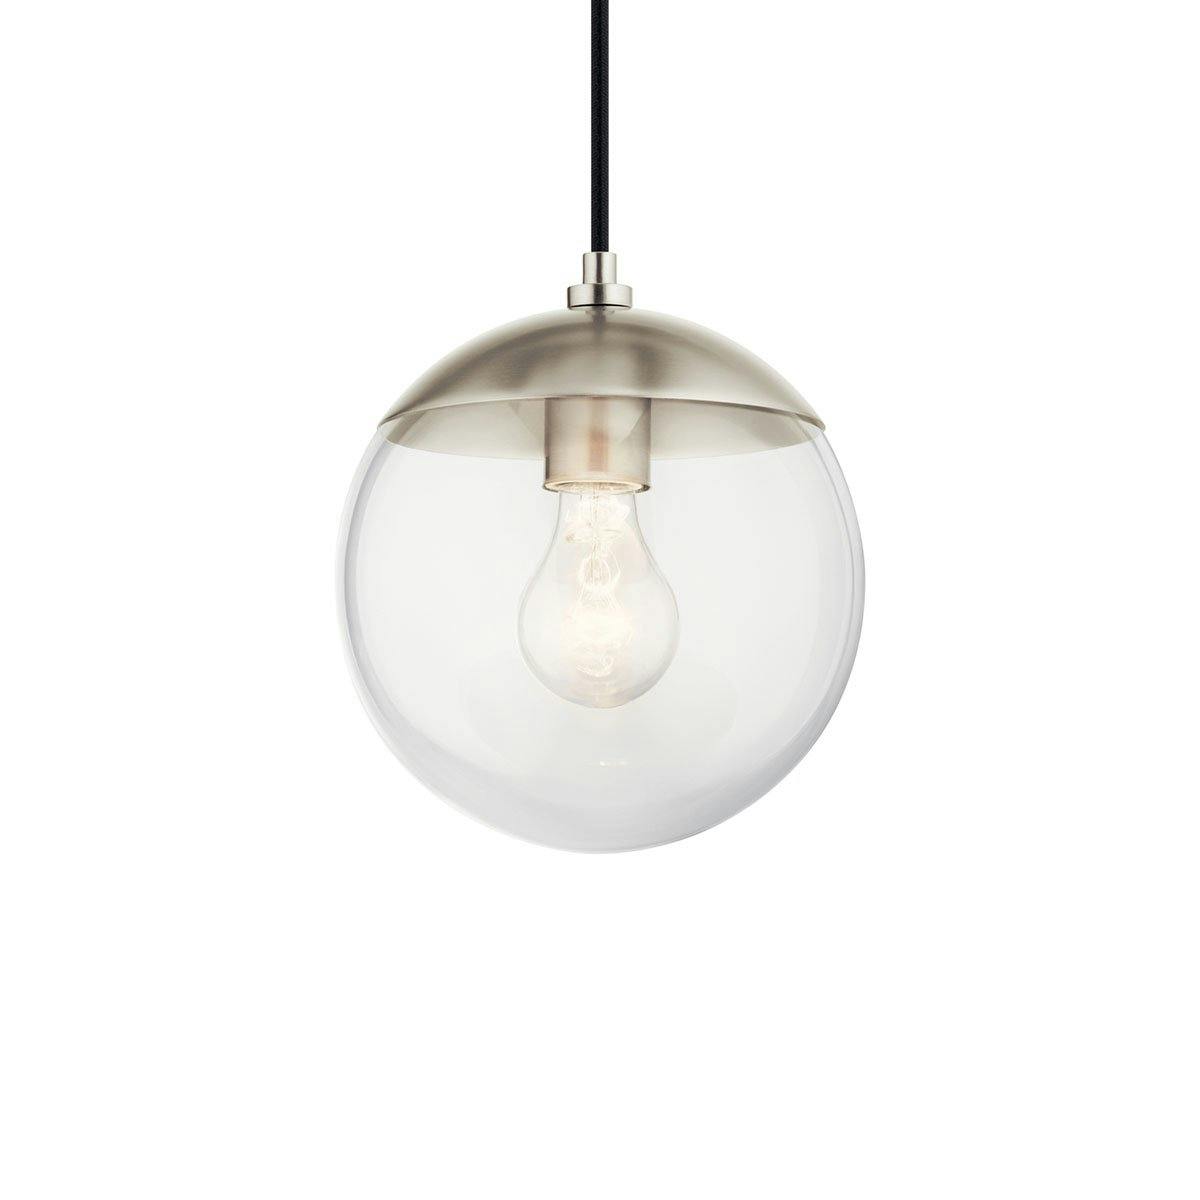 Malone 7.5" 1 Light Mini Pendant Nickel without the canopy on a white background